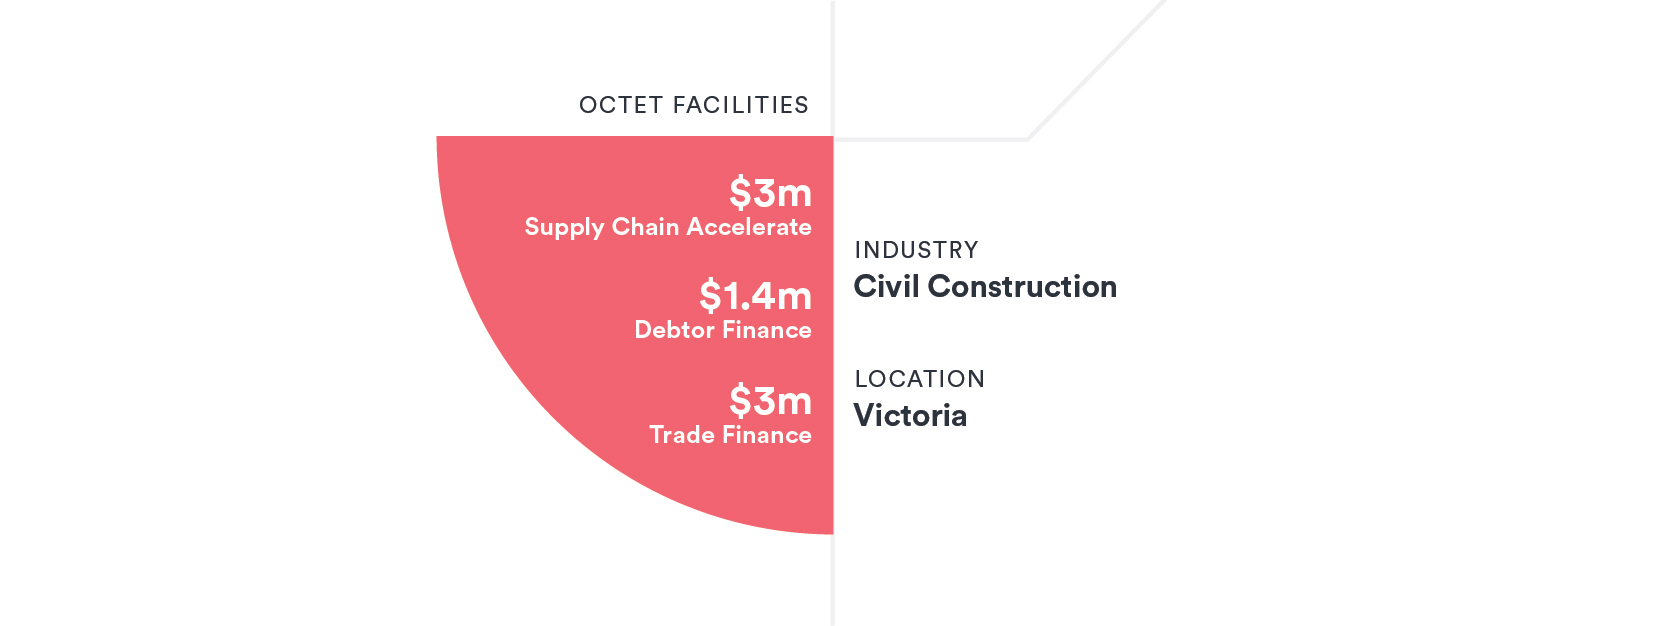 VIC civil construction company – smoothing out the seasonal cash flow cycle 